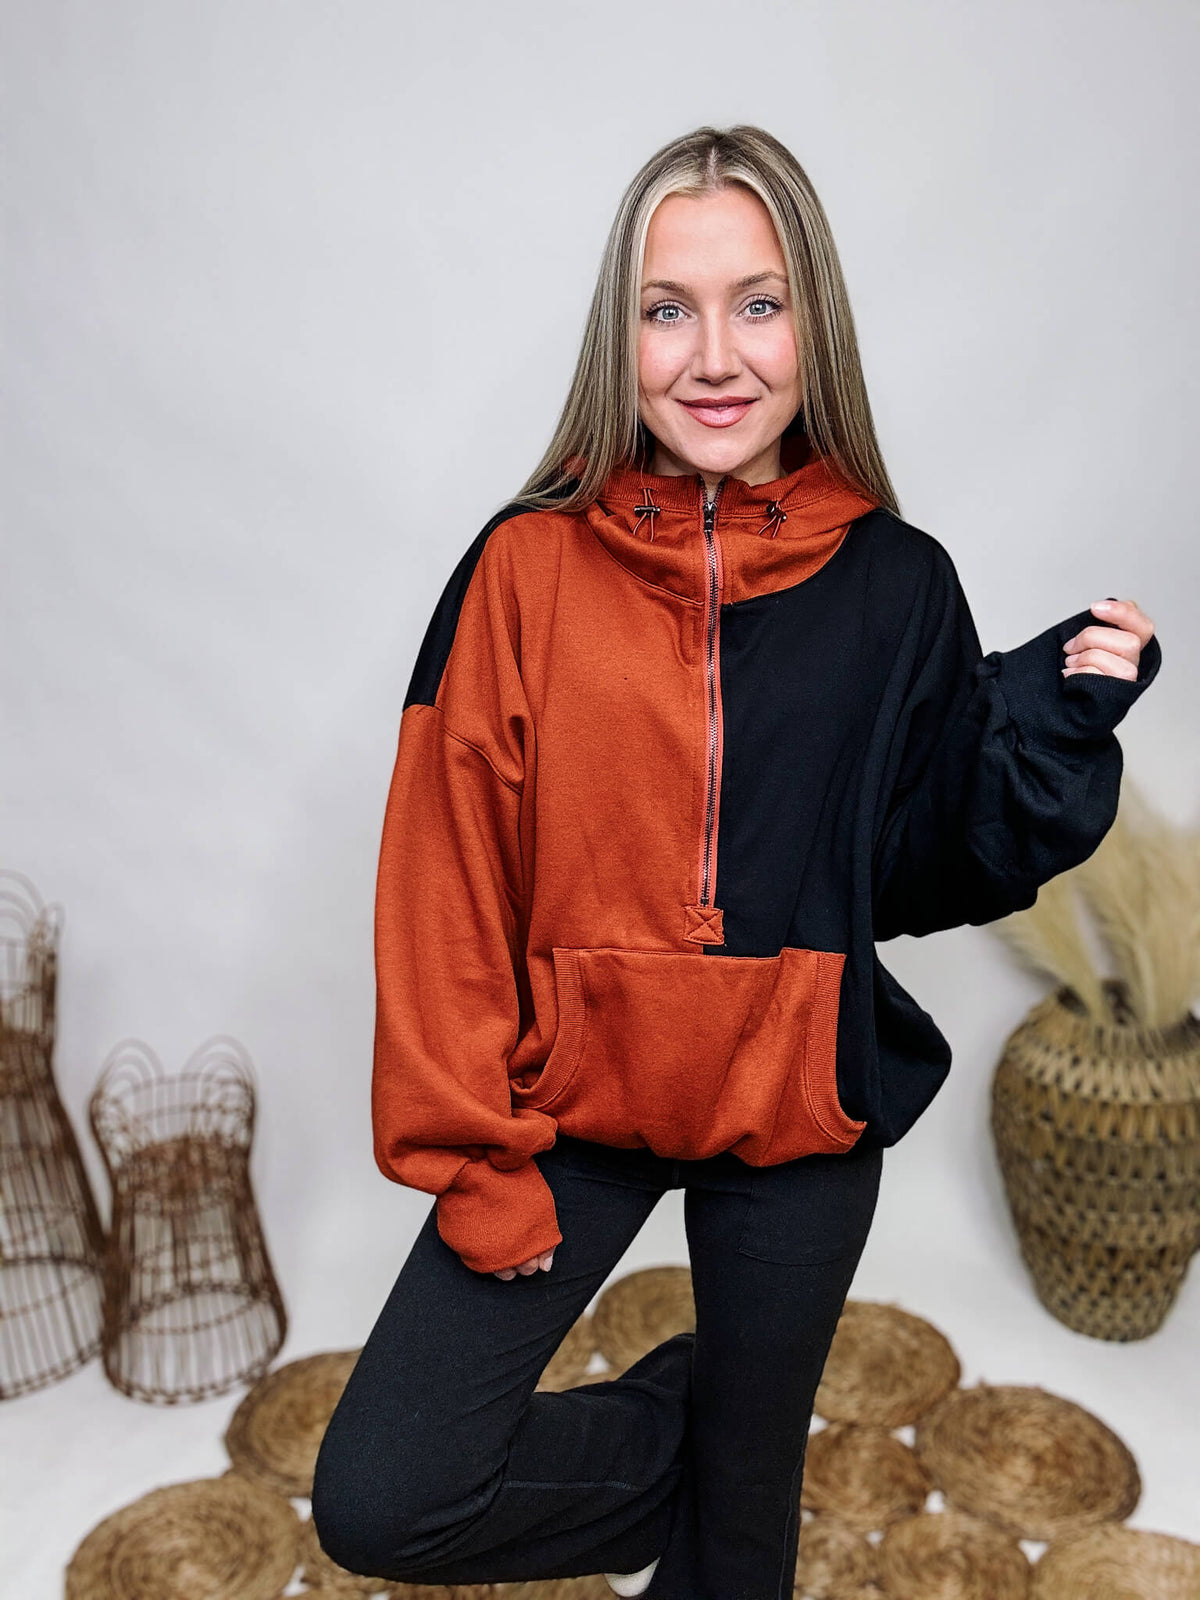 BiBi Rust and Black Colorblock Hoodie Pullover Fleece Lined Toggle Details at Hood Half Zip Elastic Stretchy Hemline Kangaroo Pocket Ribbed Cuff Details Oversized Fit